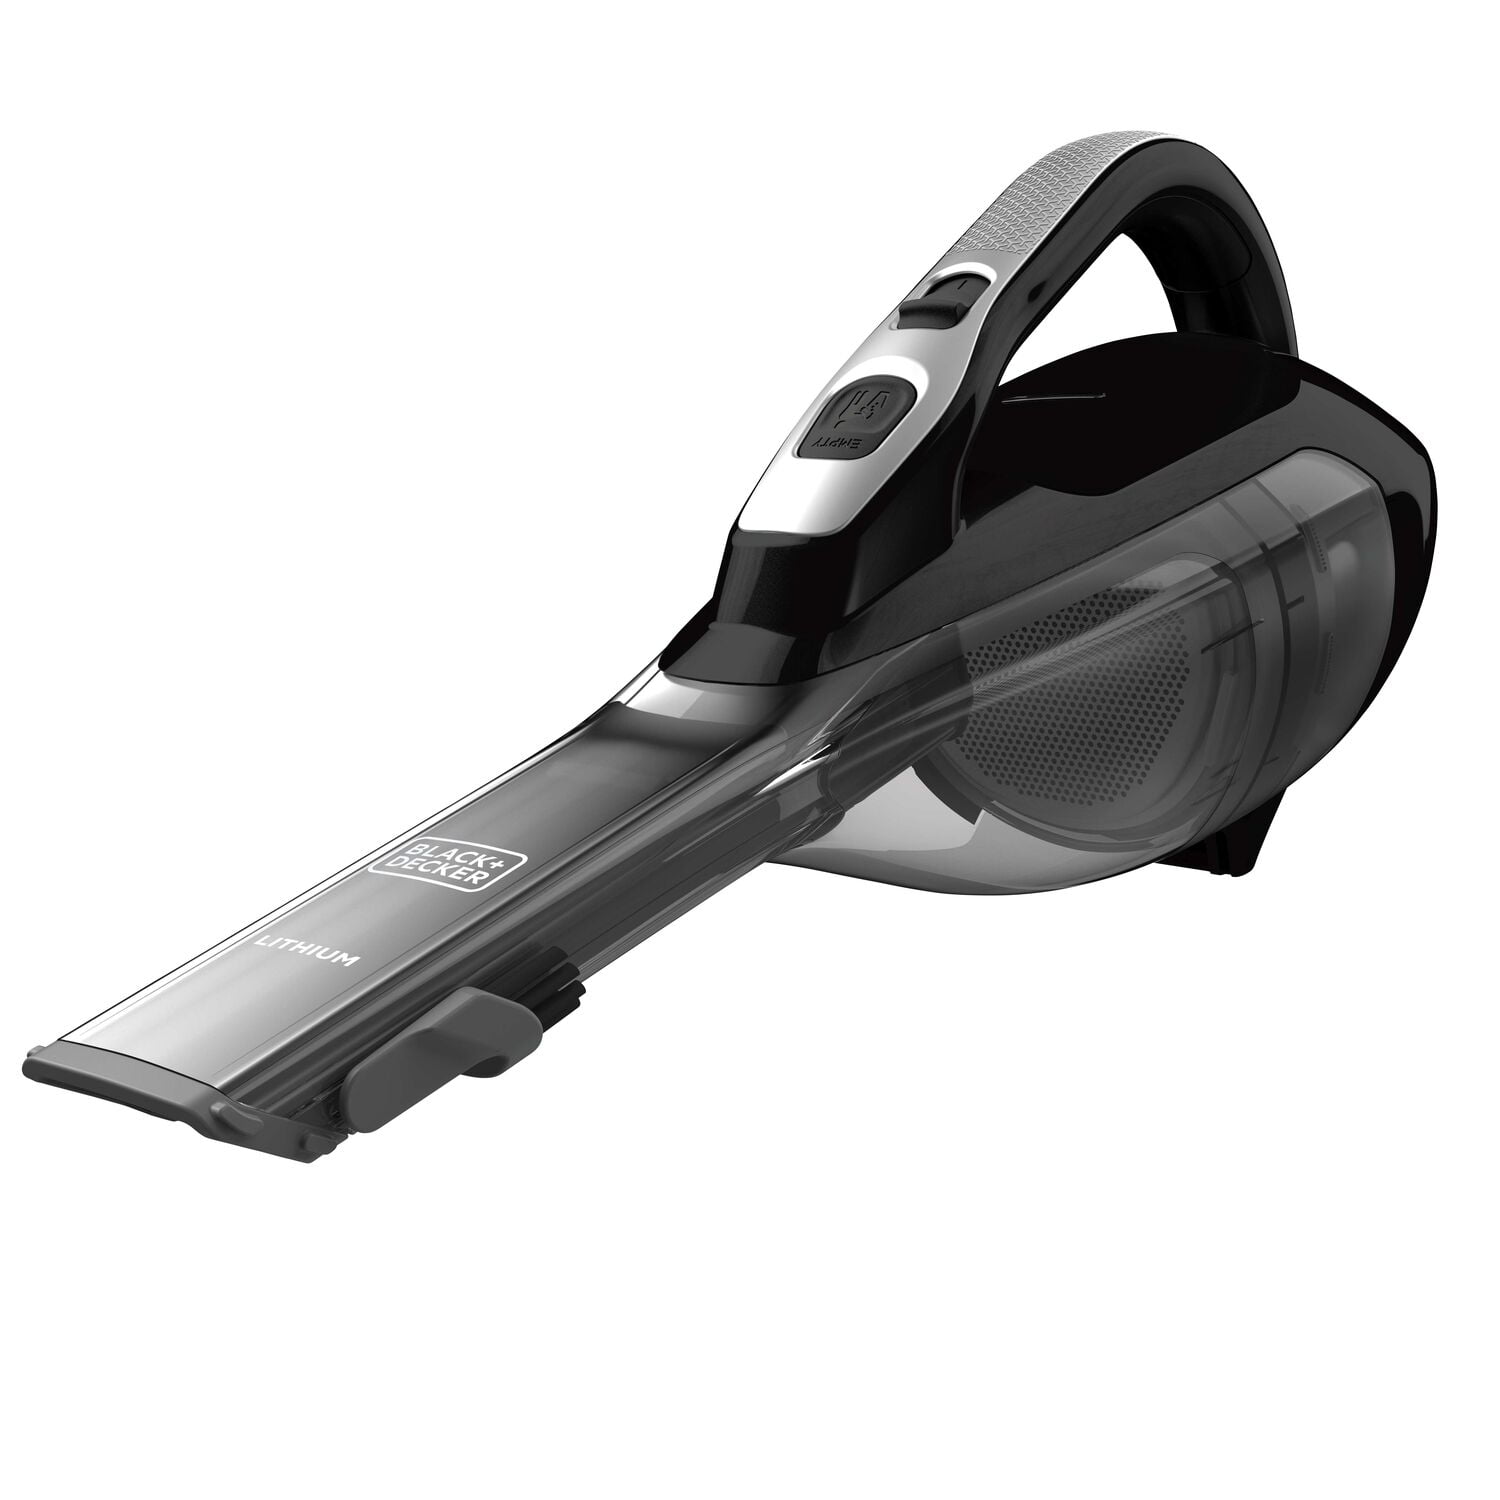 Dustbuster Cordless Hand Vacuum Advancedclean With Charger, Filter And  Brush Crevice Tool